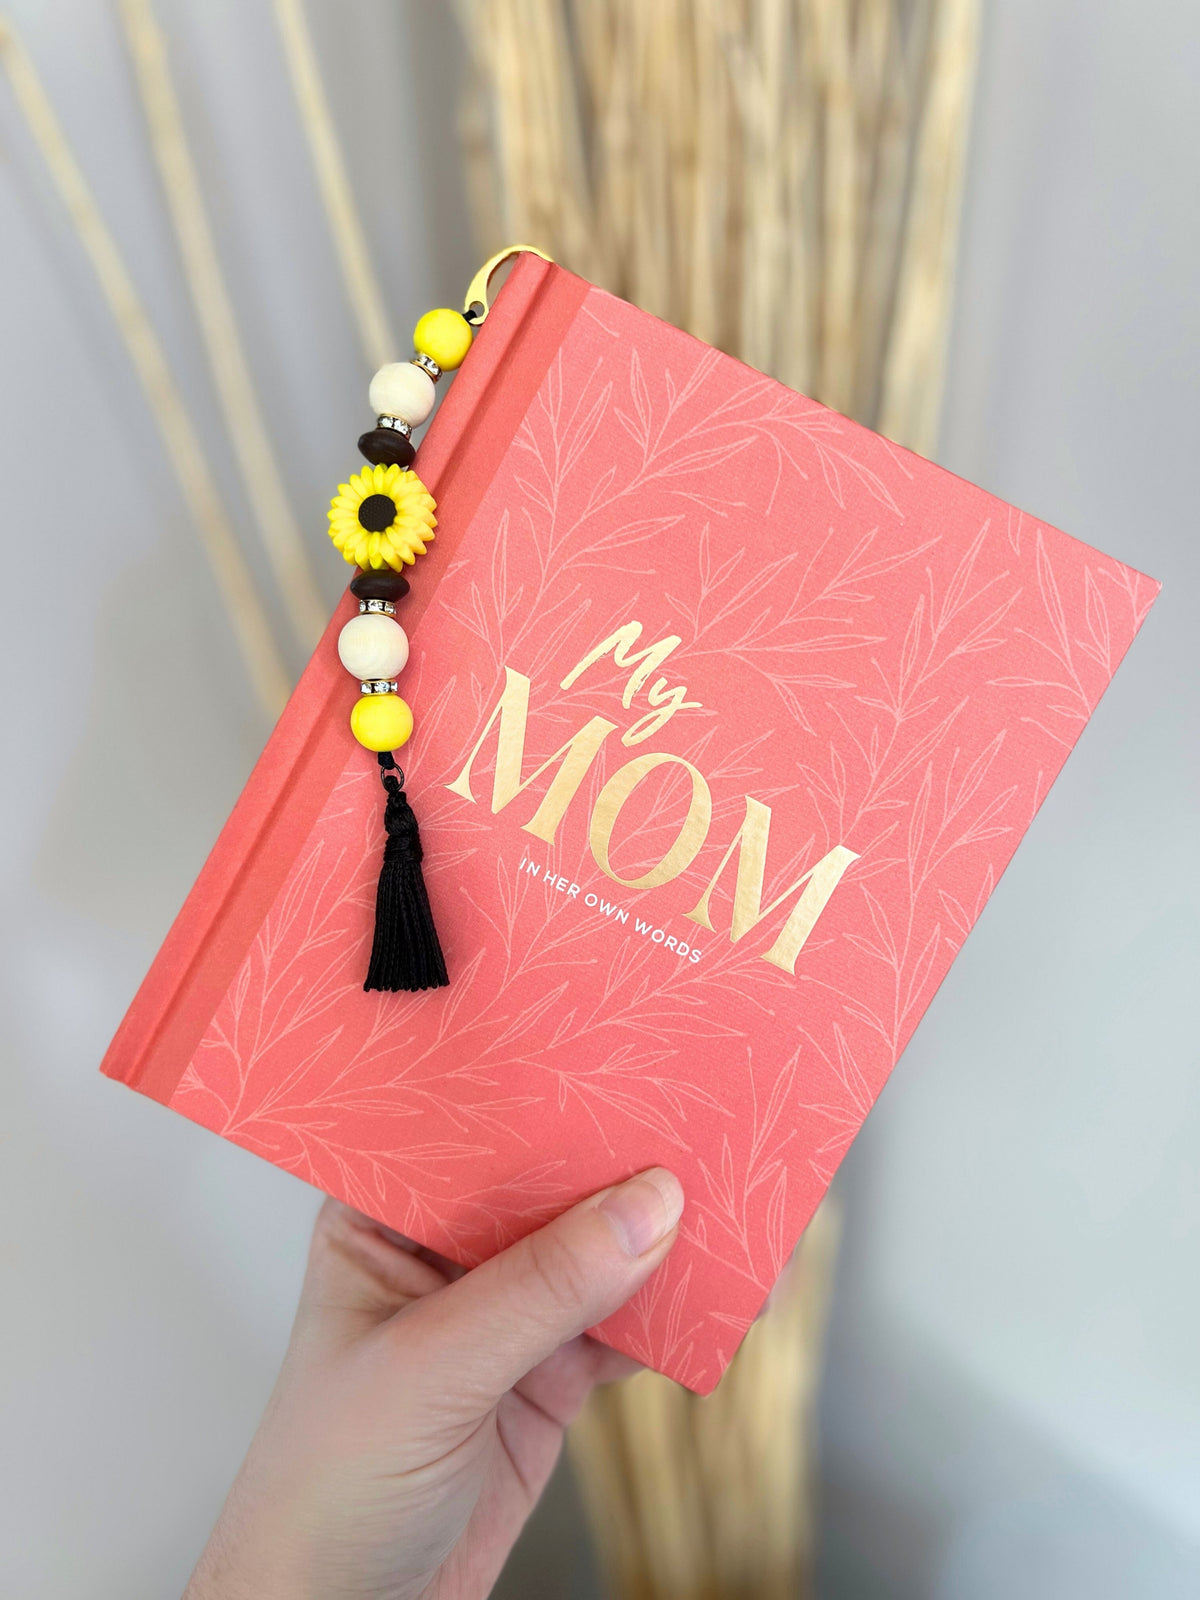 A handmade silicone beaded yellow sunflower daisy bookmark with rhinestones and wood accent beads finished with a chocolate brown faux silk fringe drop tassel laying over an inspirational journal book called "My Mom In Her Own Words"